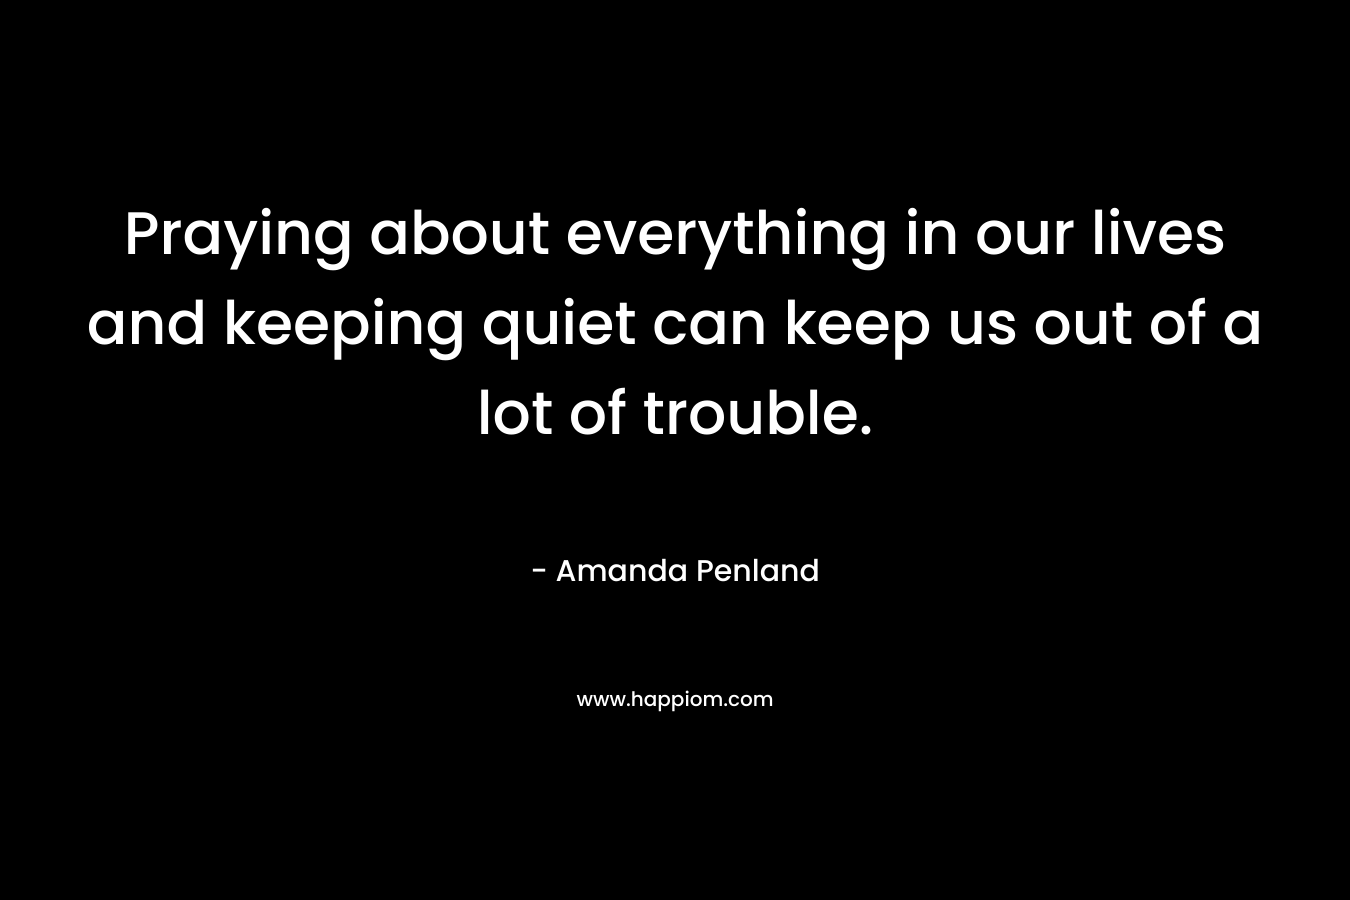 Praying about everything in our lives and keeping quiet can keep us out of a lot of trouble. – Amanda Penland